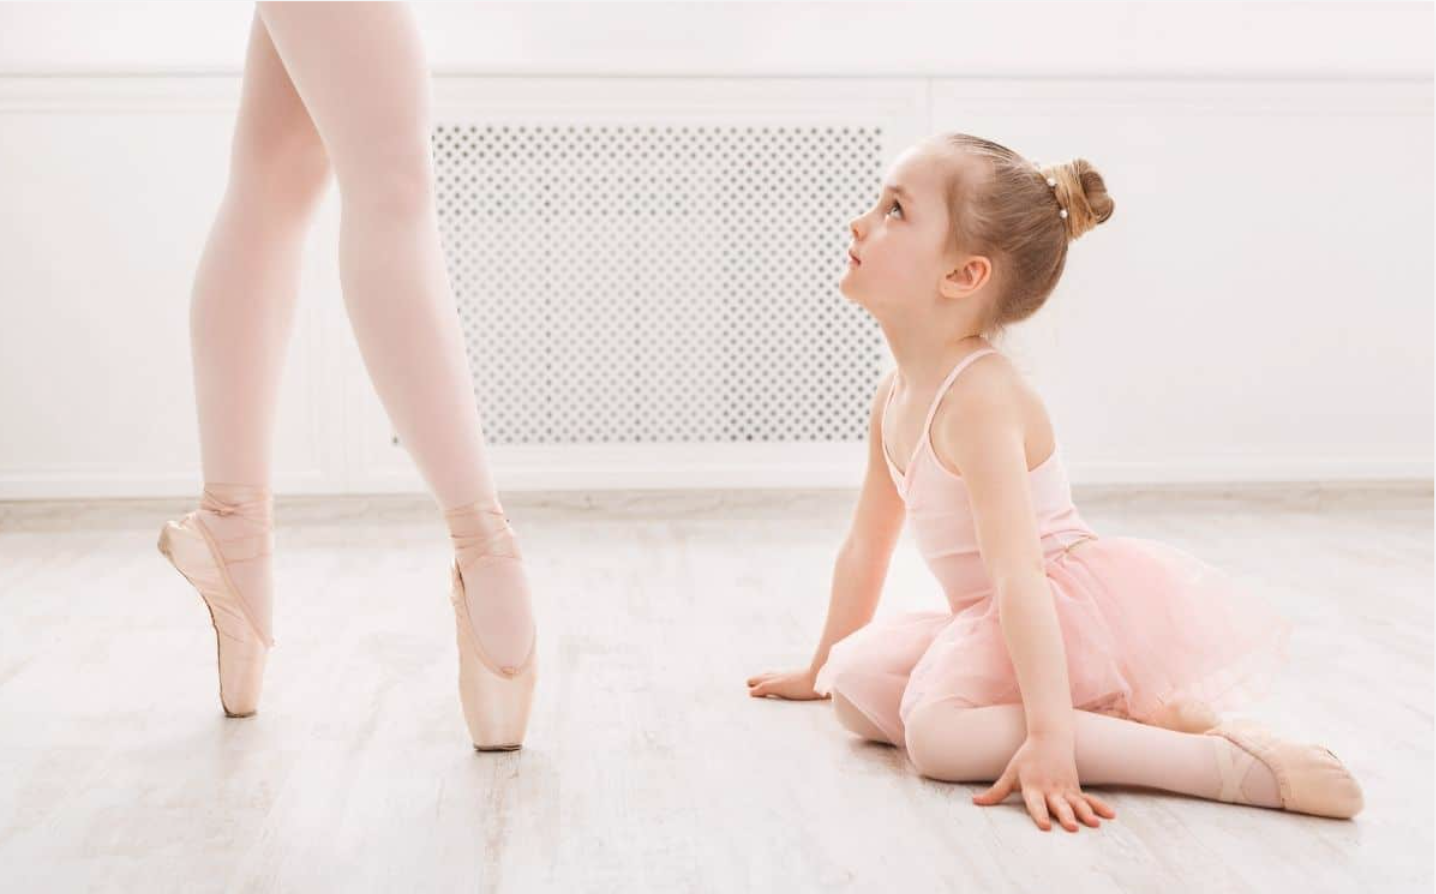 Convertible Ballet Tights VALUE 2 PACK (Prima Pink)